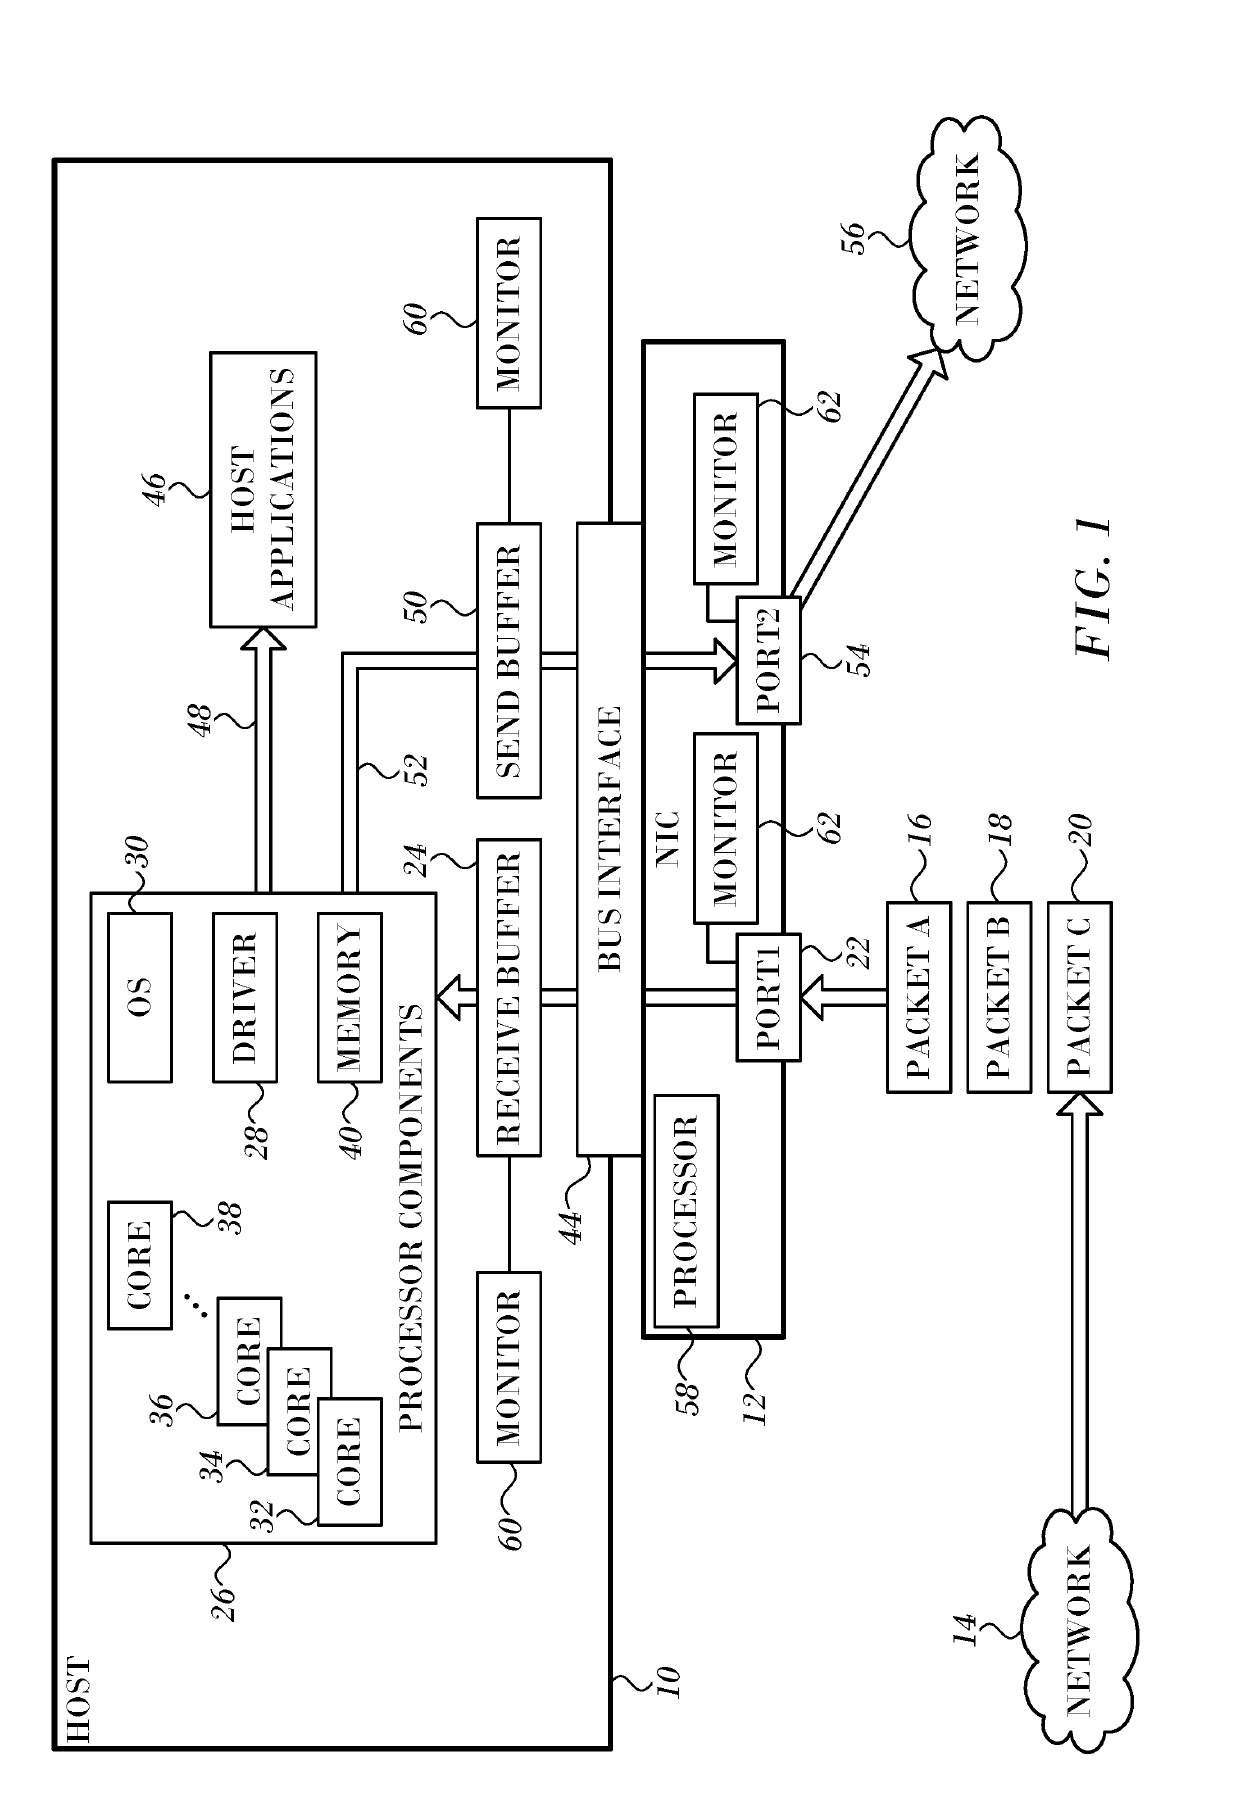 Elephant Flow Detection in Network Access